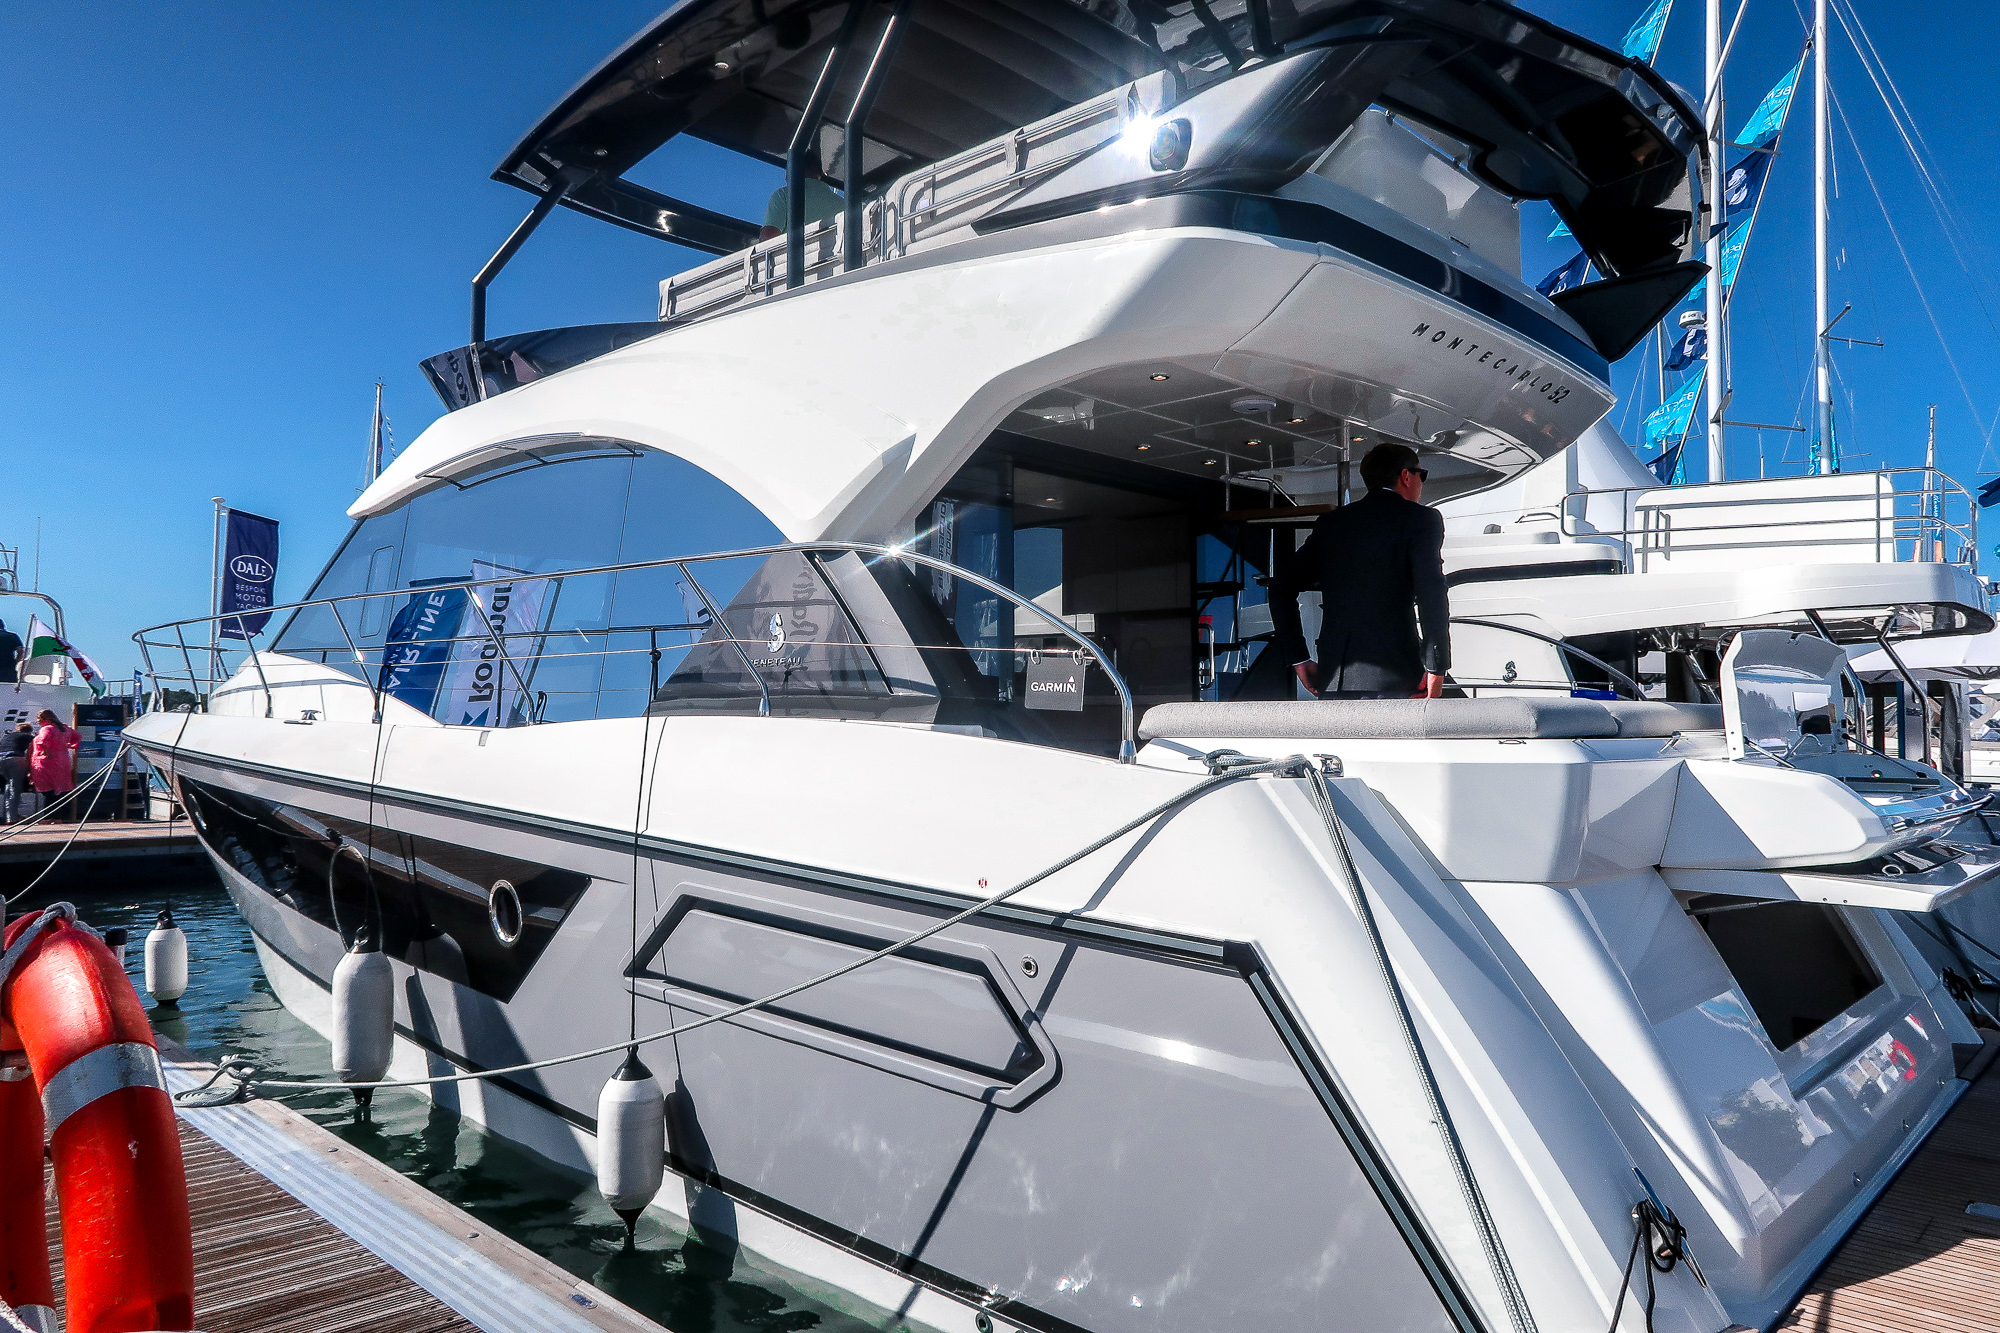 Southampton Boat Show: How To Get Discounted Tickets 45